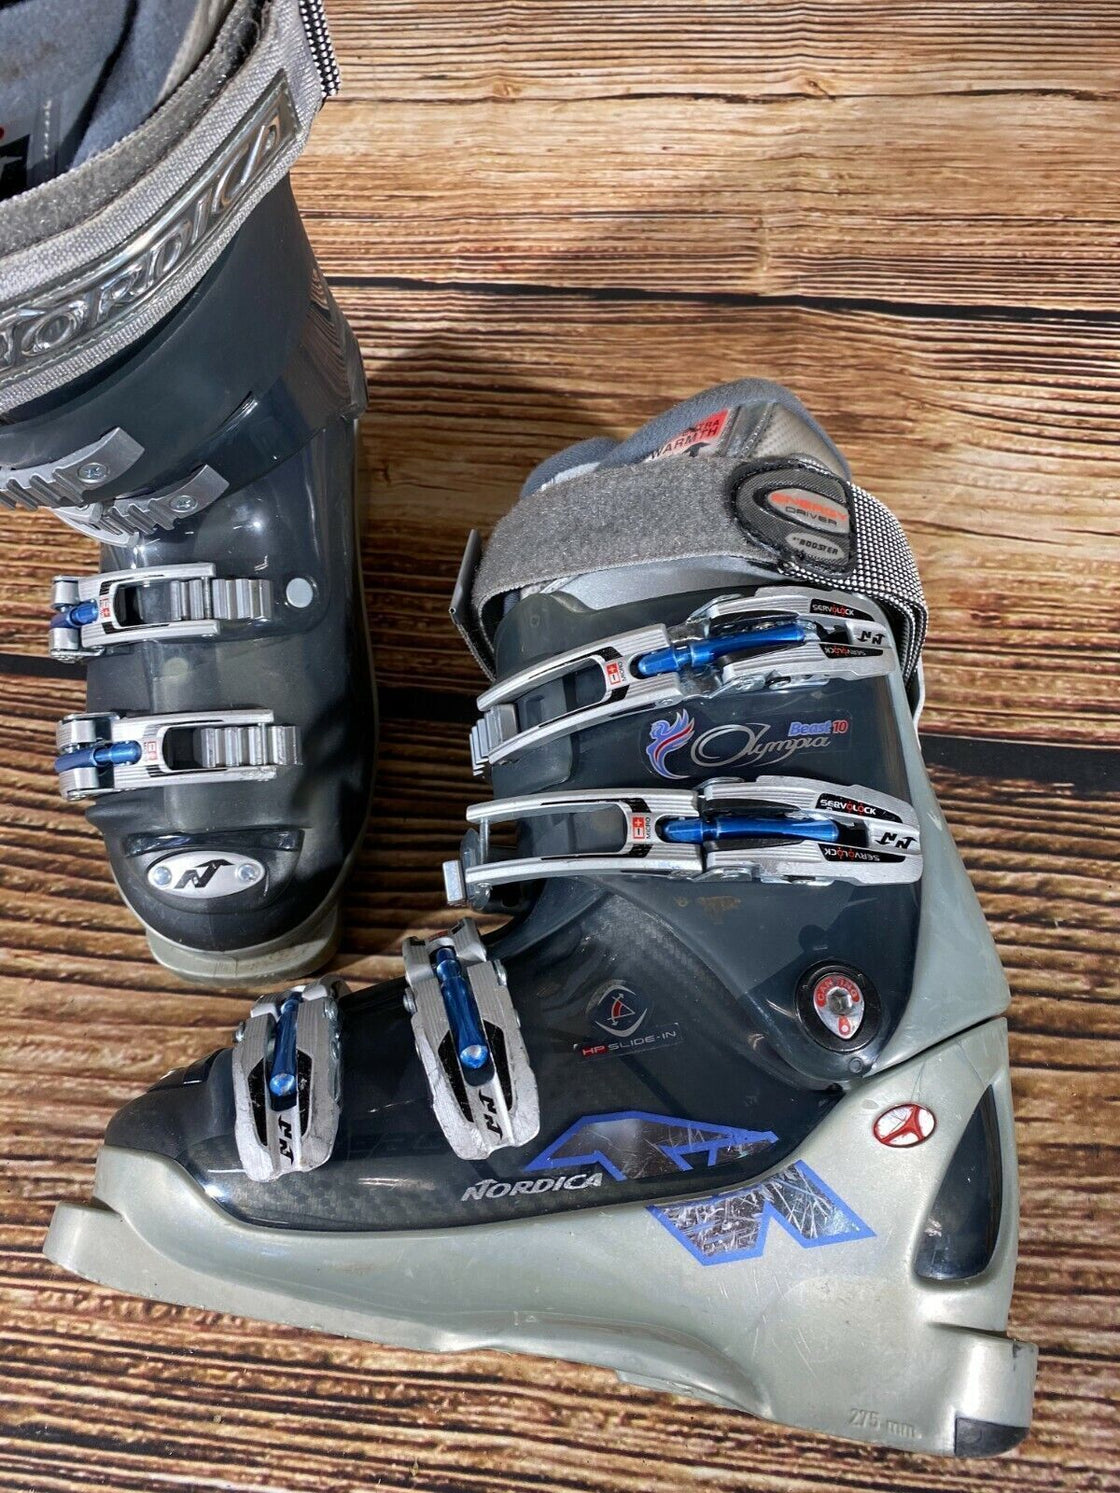 NORDICA Olympia Beast 10 Alpine Ski Boots Mountain Skiing Boots Size 230 - 235